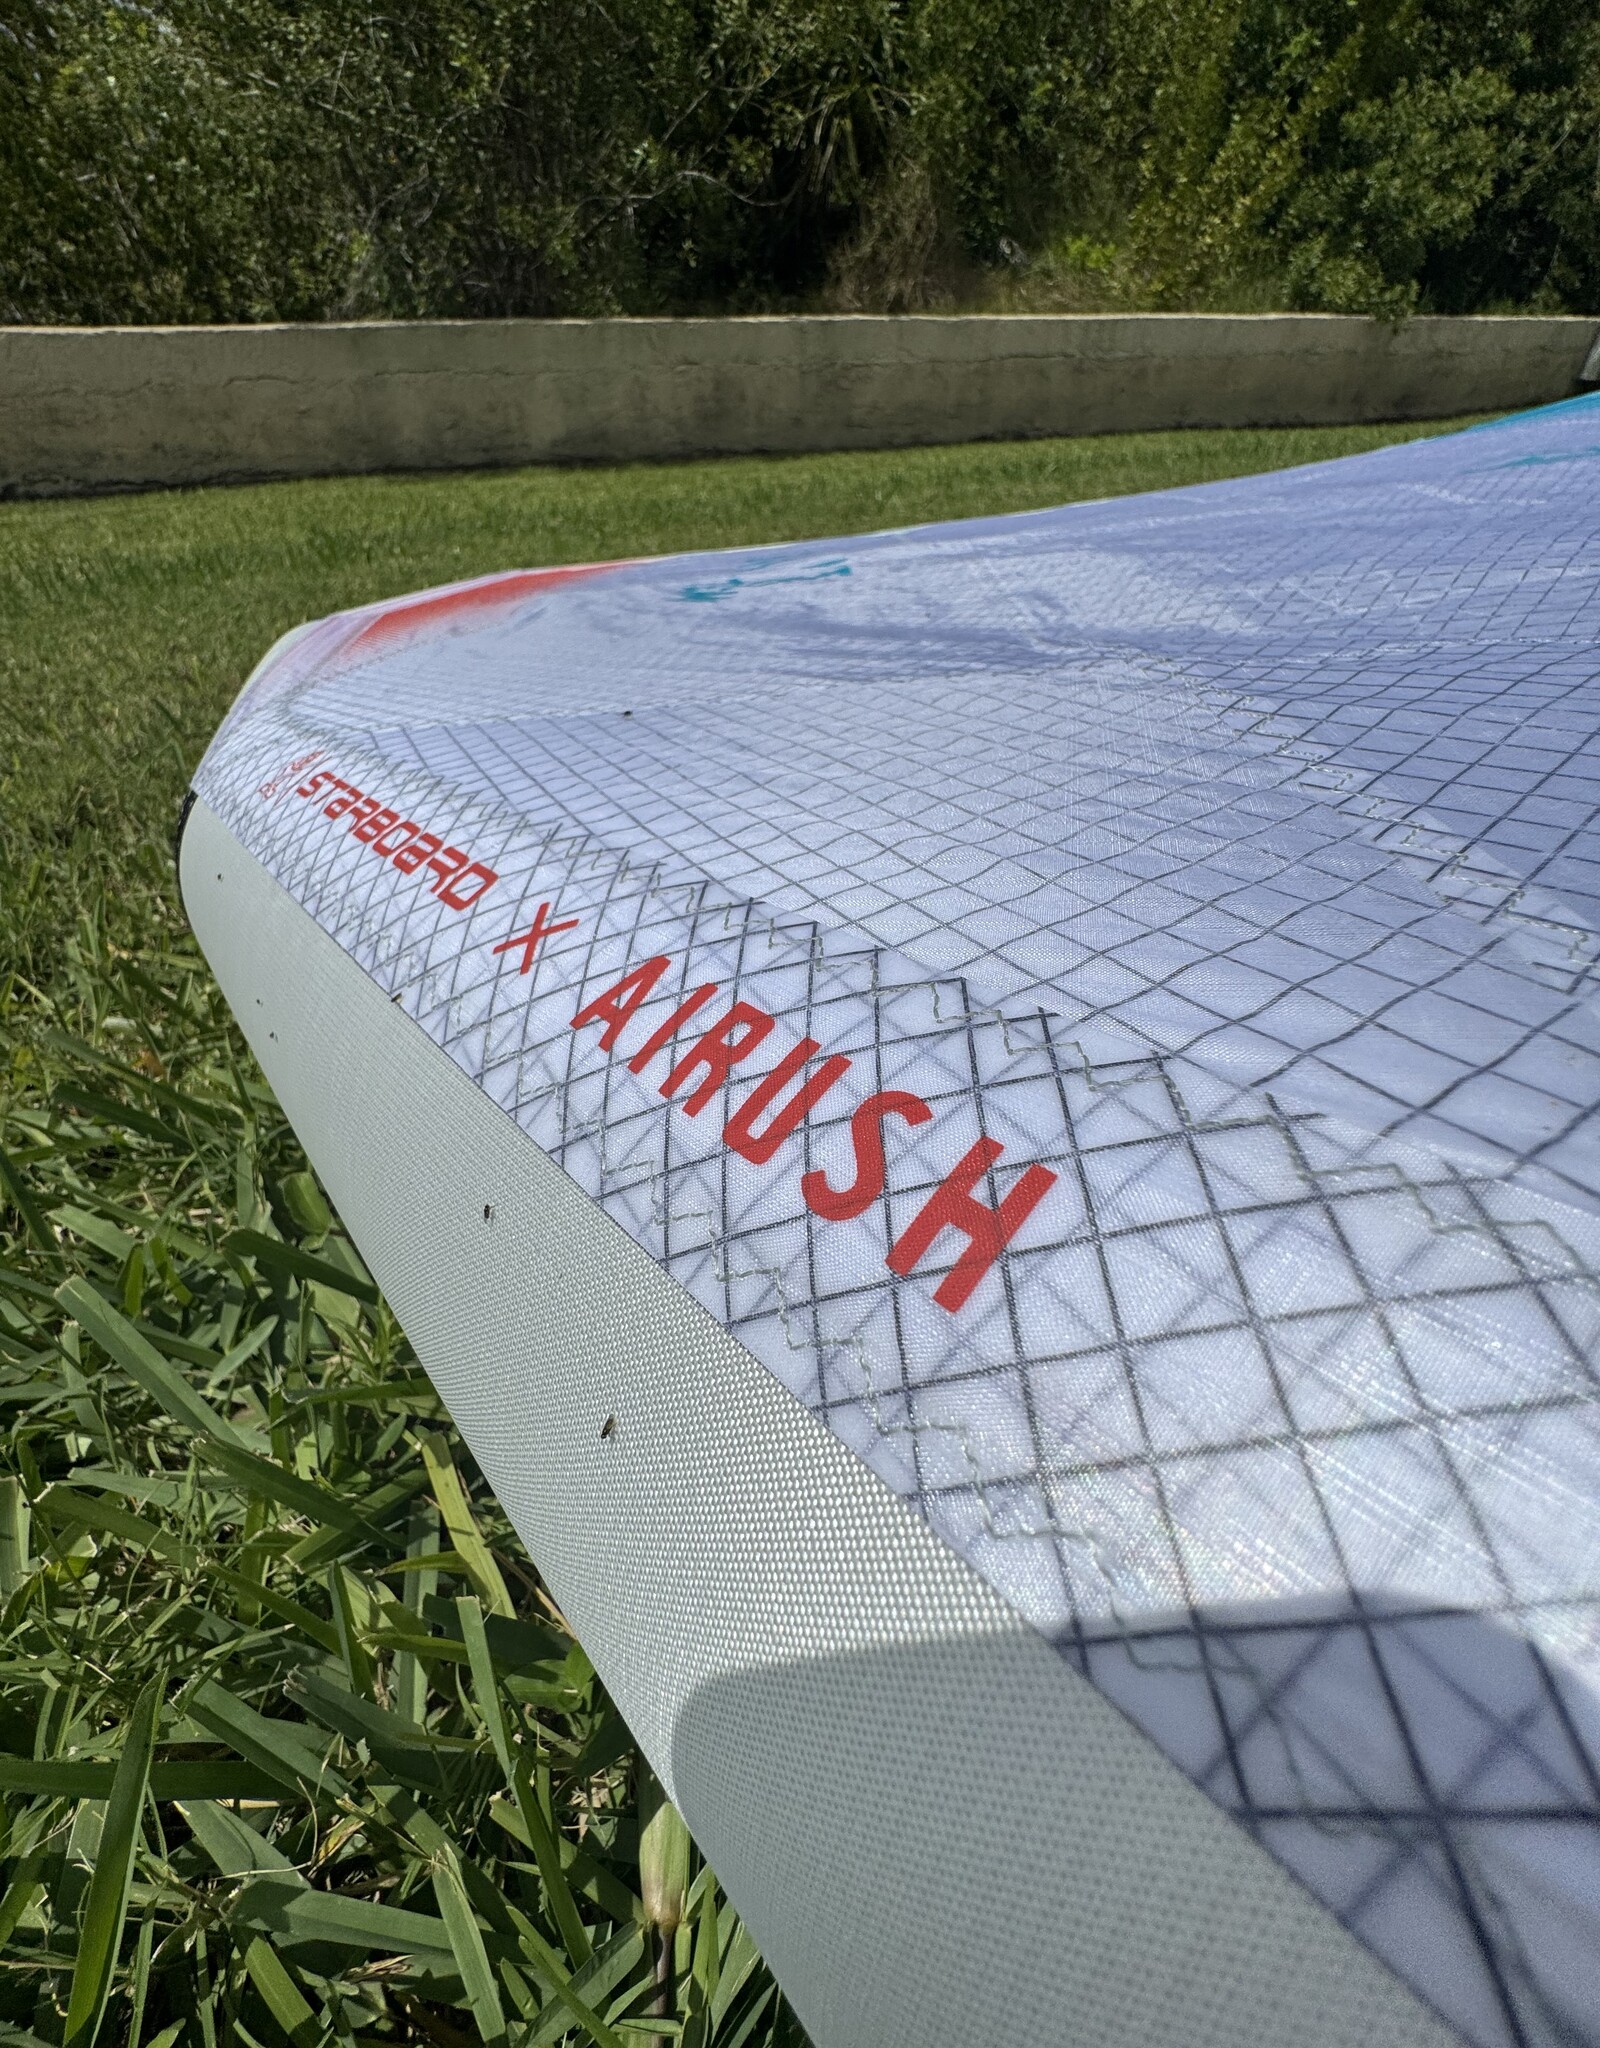 FREEWING FREEWING AIR TEAM 5.5M ULTRA X CANOPY AND HO'OKIPA AIRFRAME